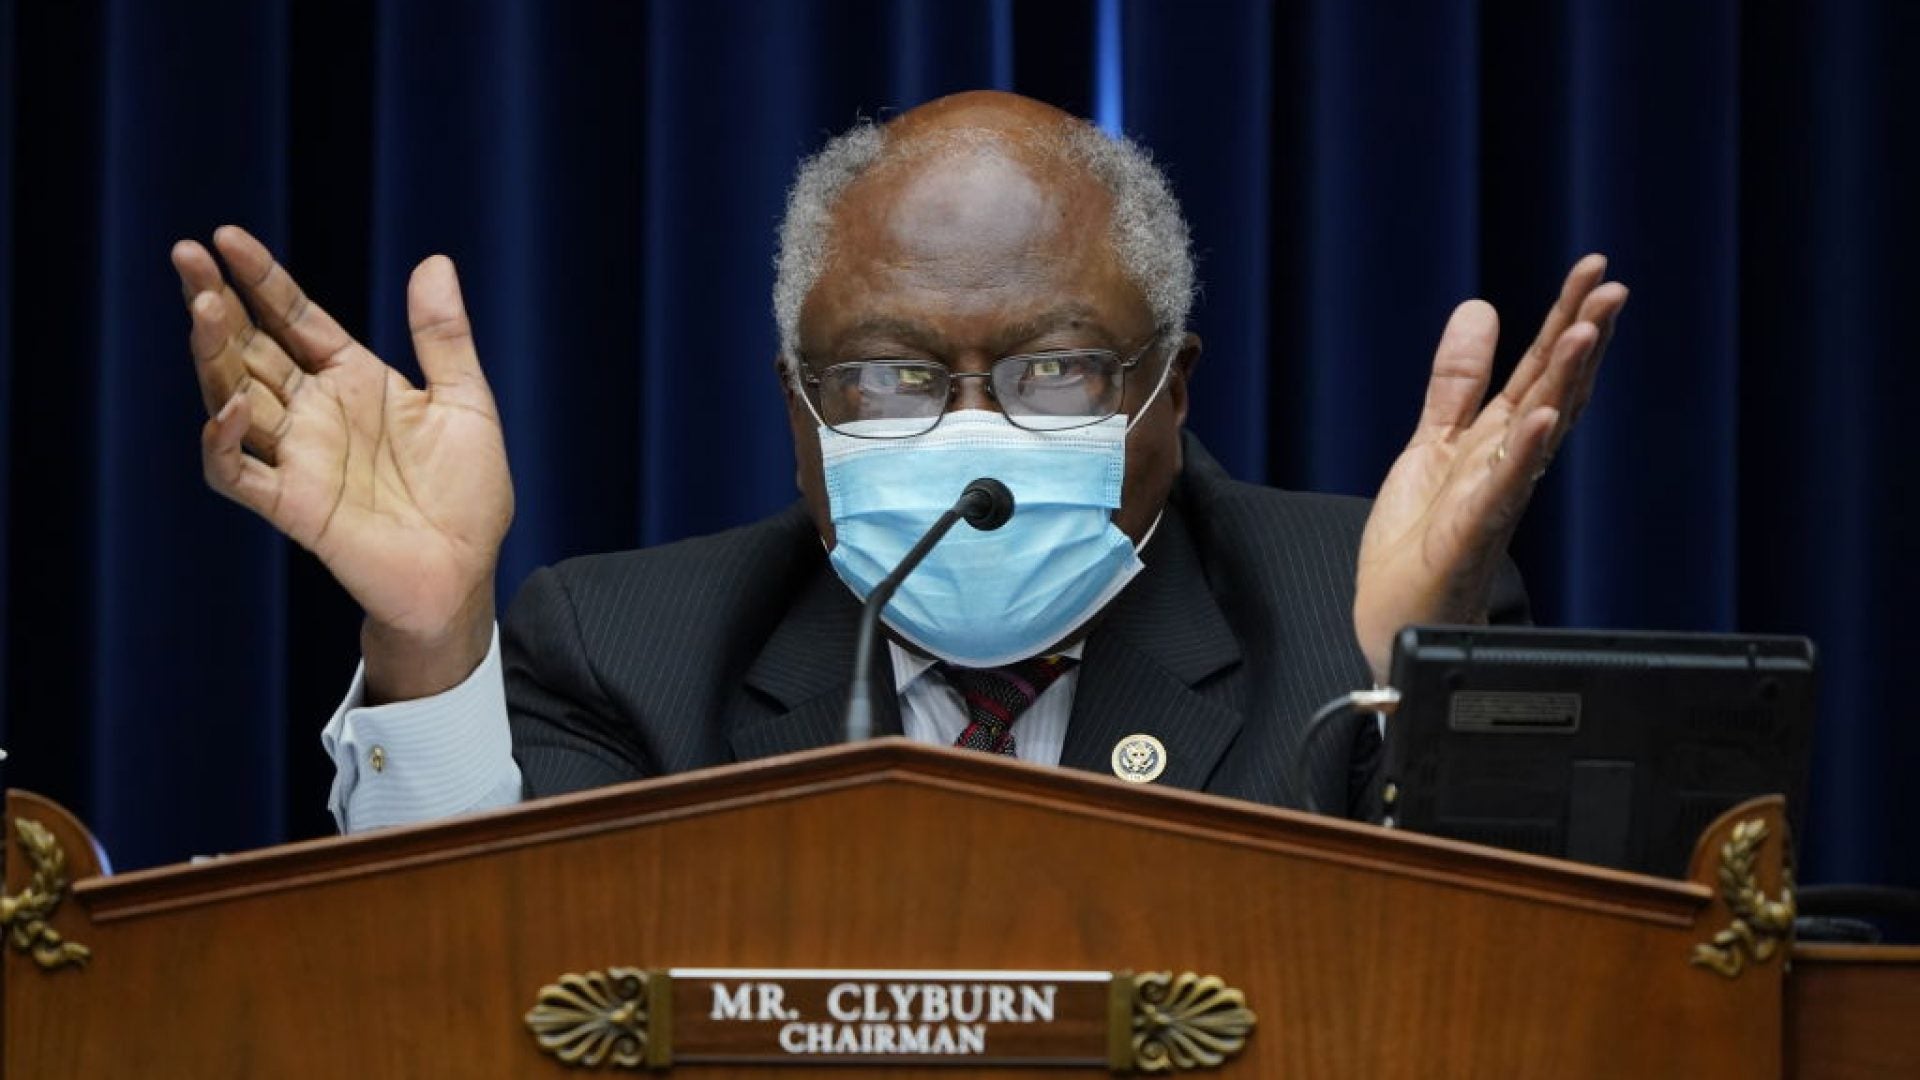 Jim Clyburn: "If Democrats Run On Medicare For All, Defund The Police, Socialized Medicine, We Won't Win"